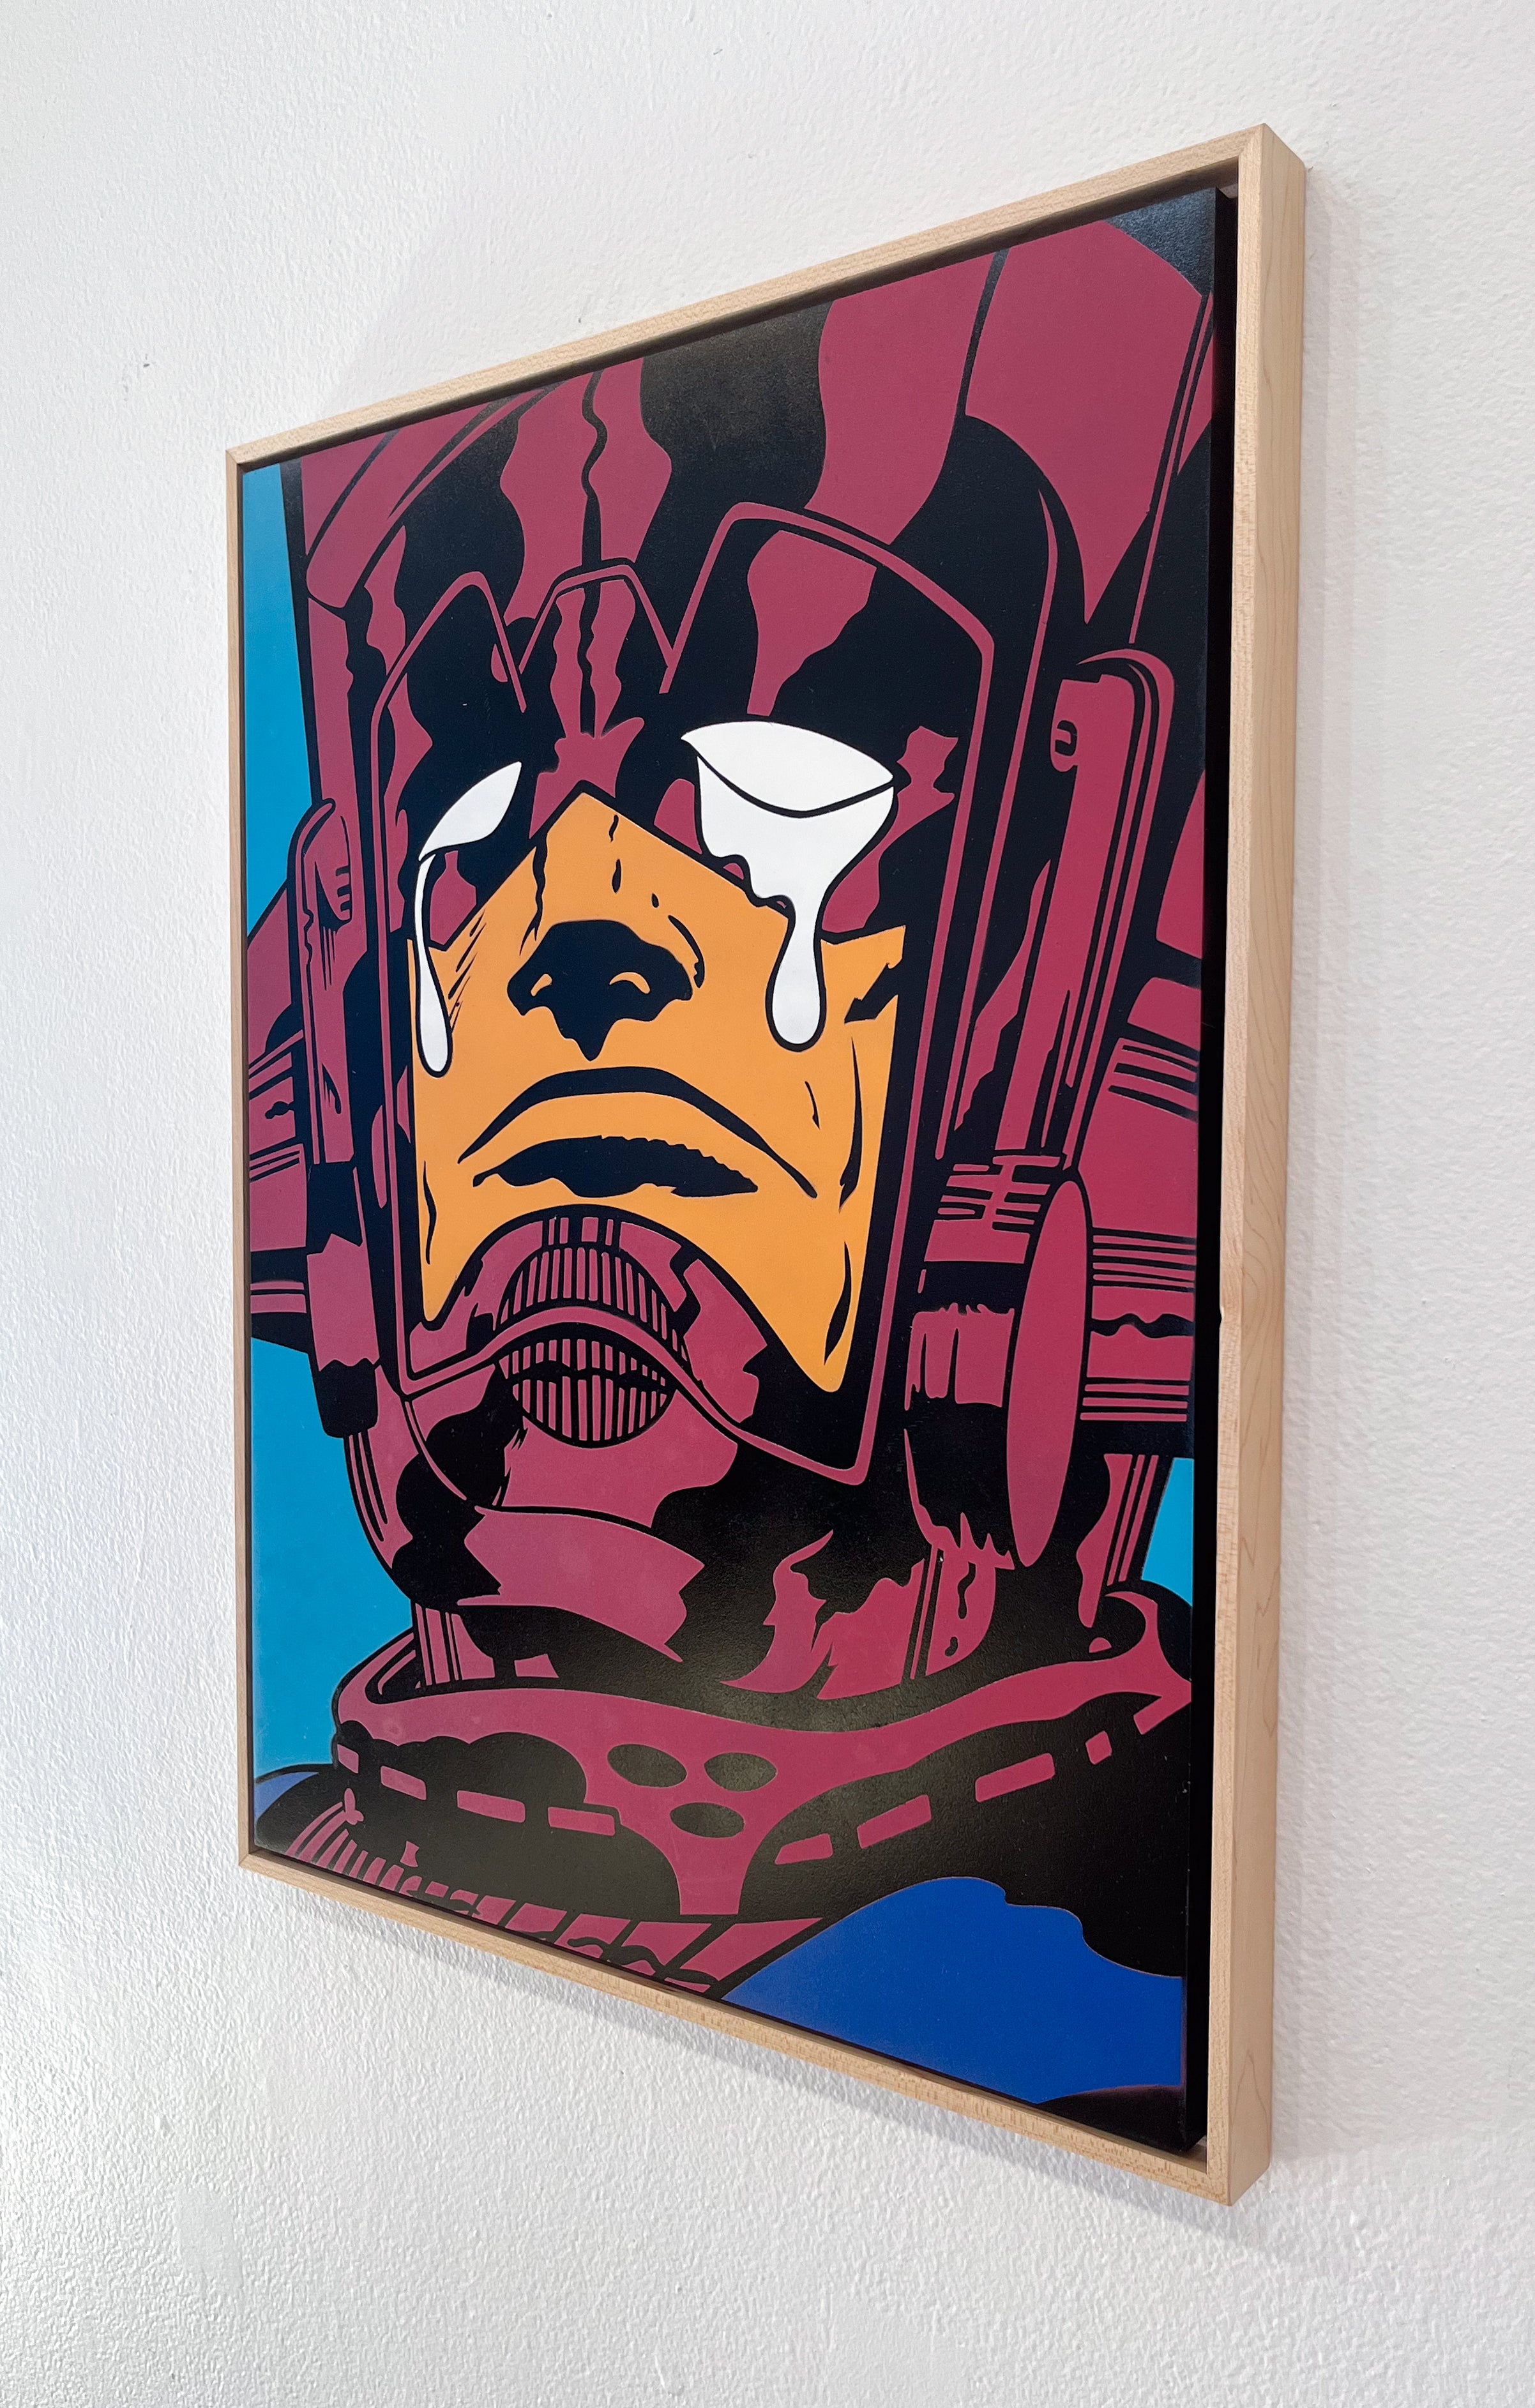 "Galactus' Anguish" by R6D4